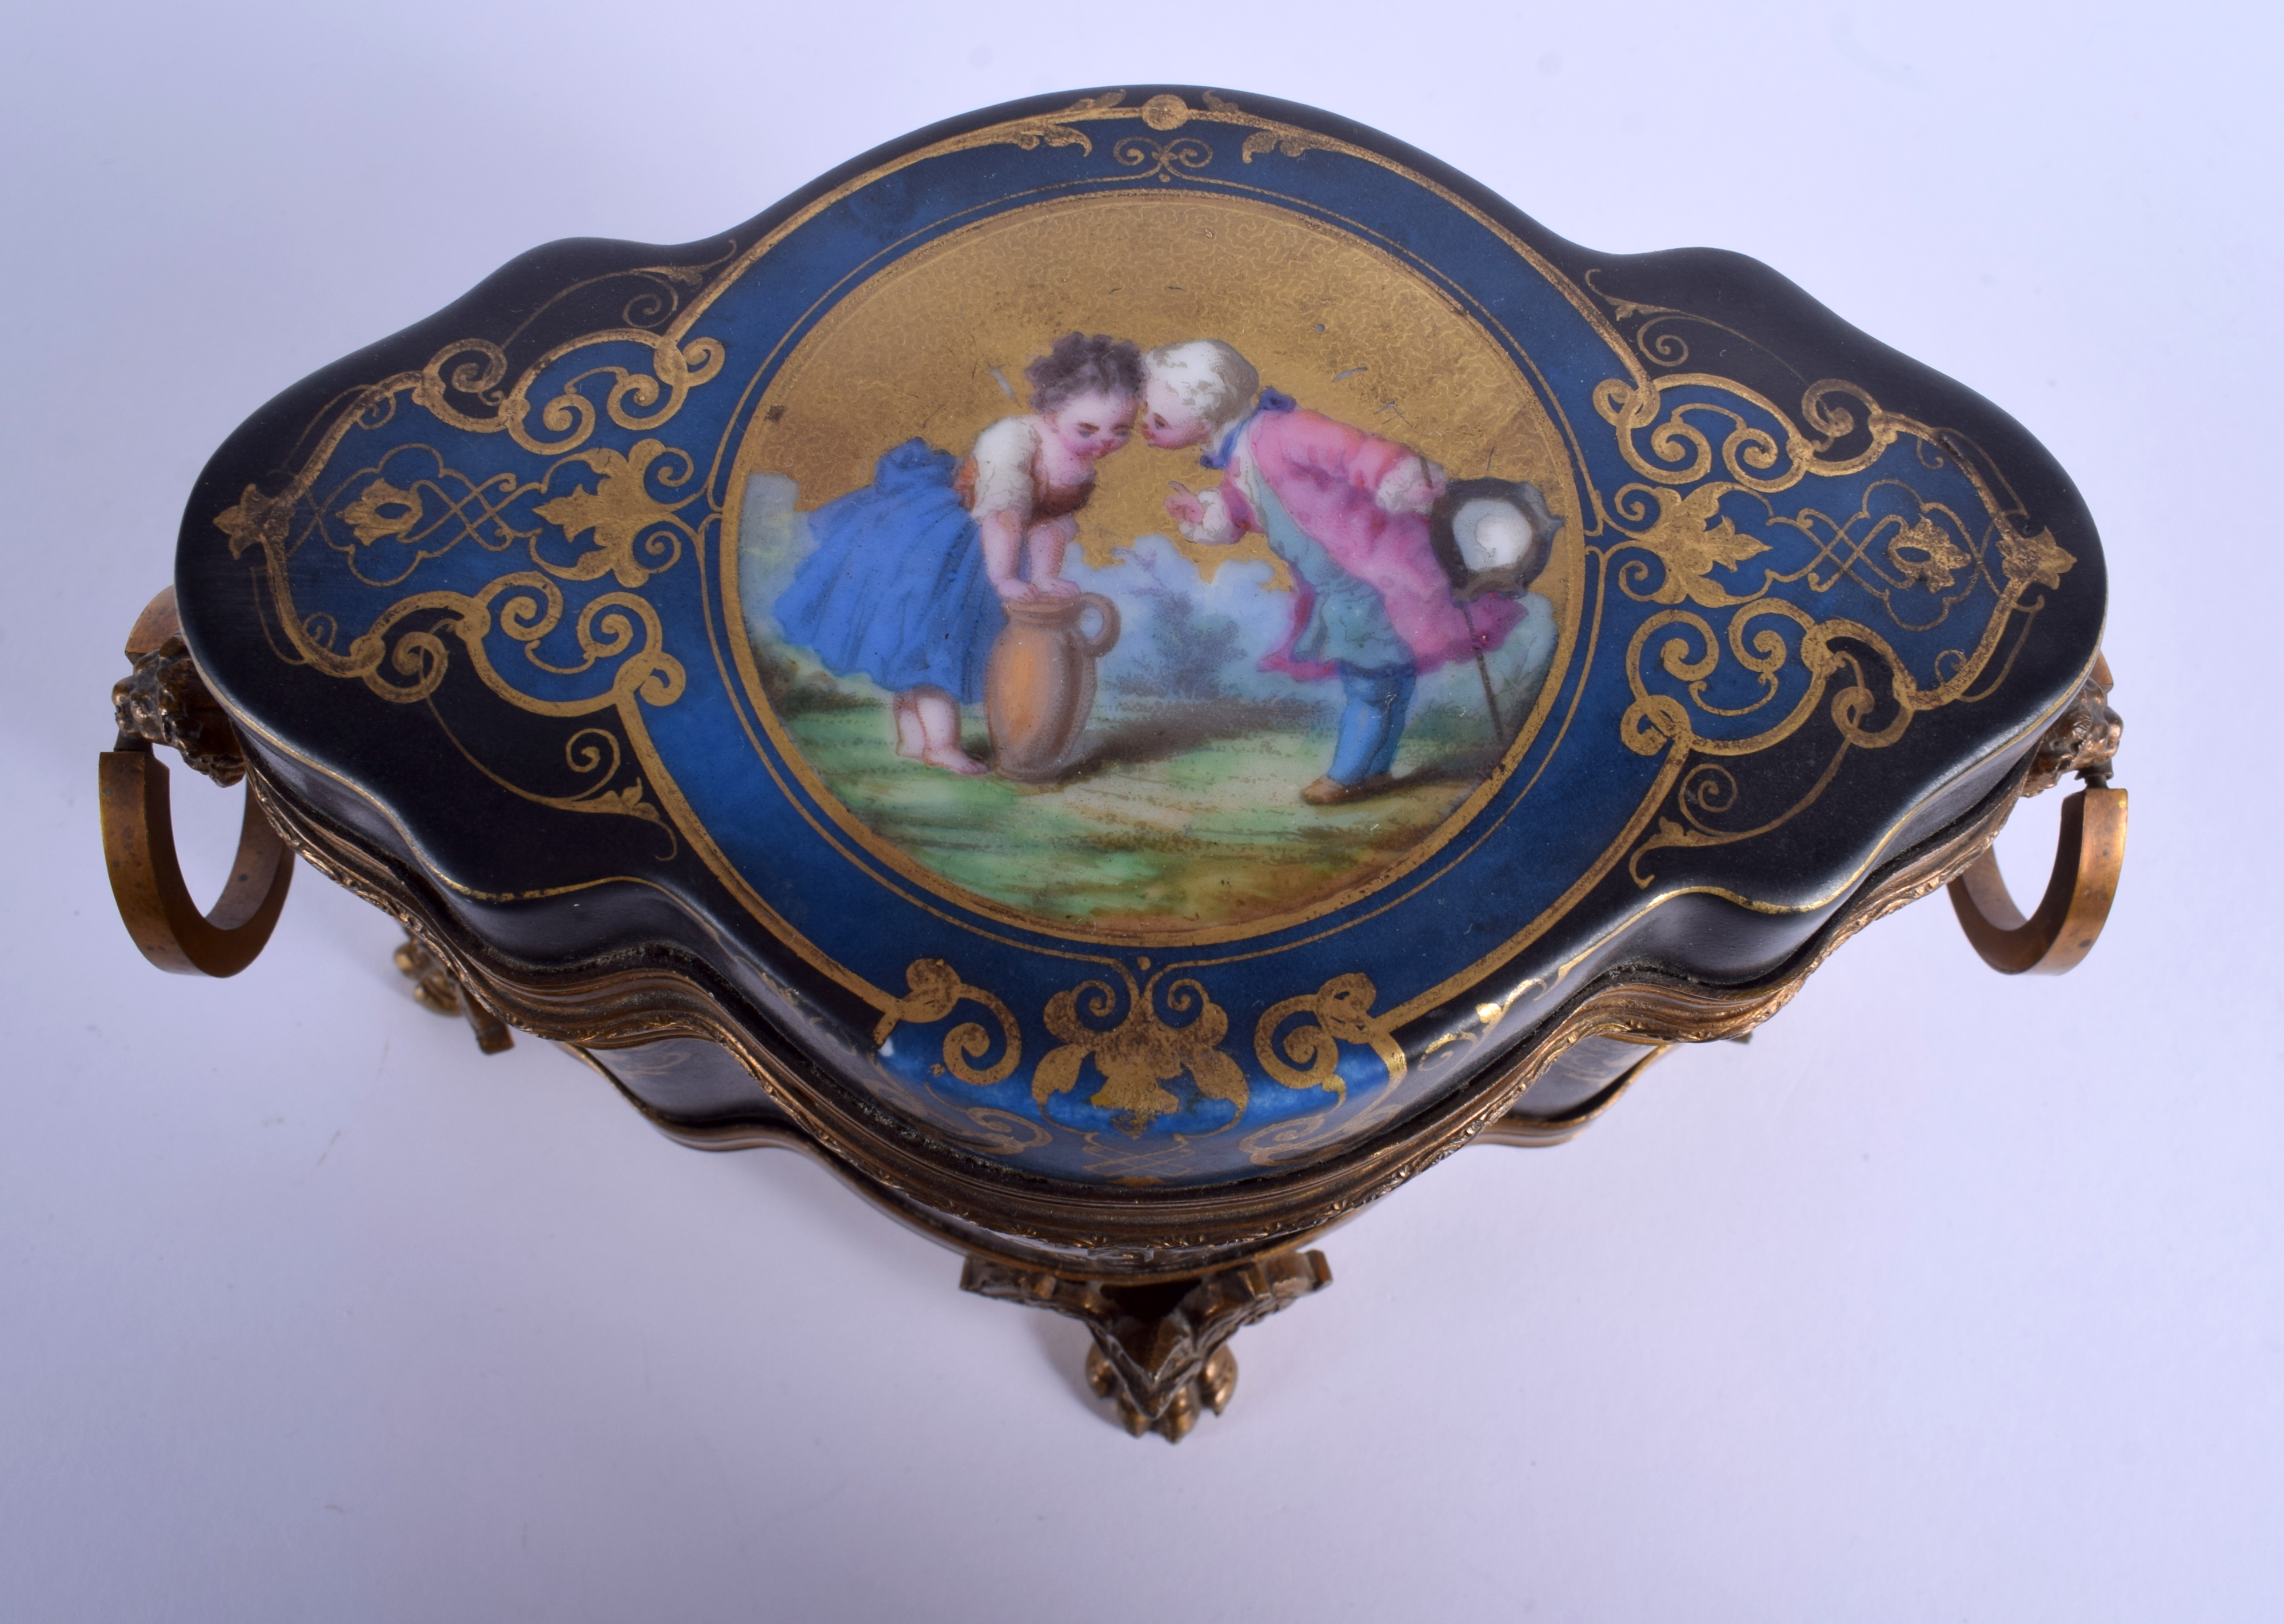 A RARE EARLY 19TH CENTURY FRENCH PORCELAIN AND BRONZE CASKET painted with two young lovers within a - Image 3 of 4